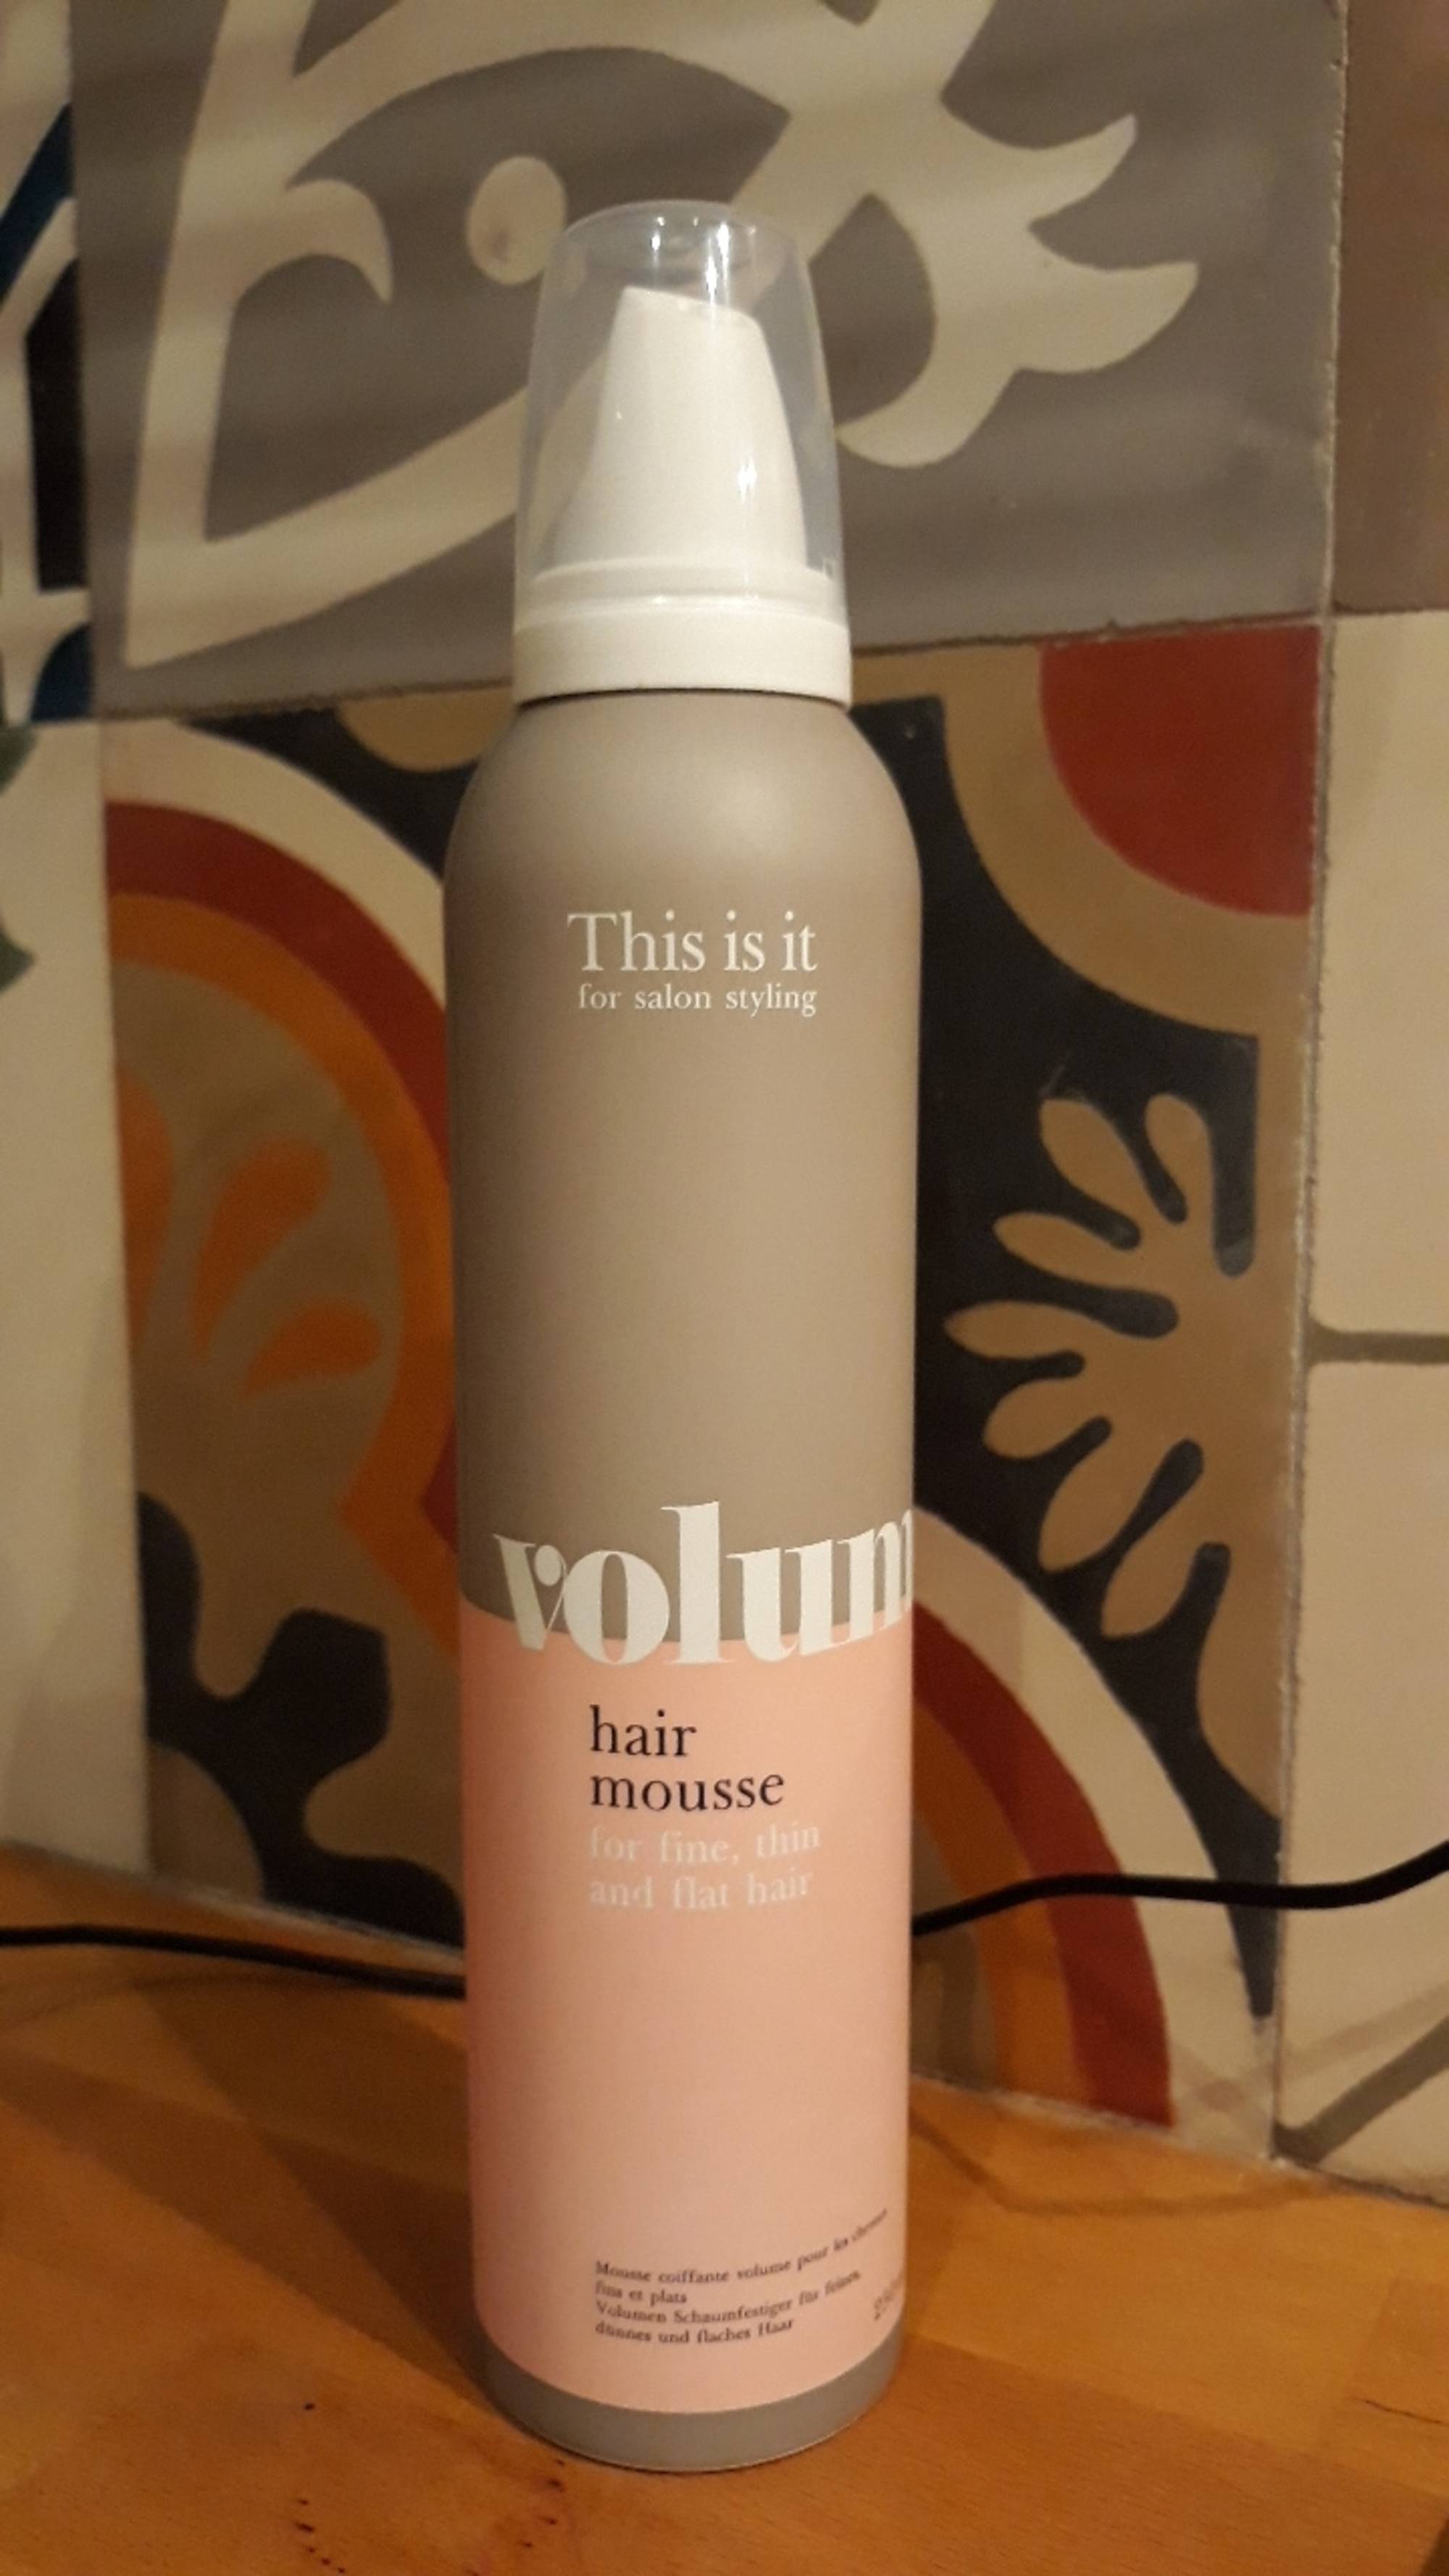 THIS IS IT - Volume - Hair mousse 